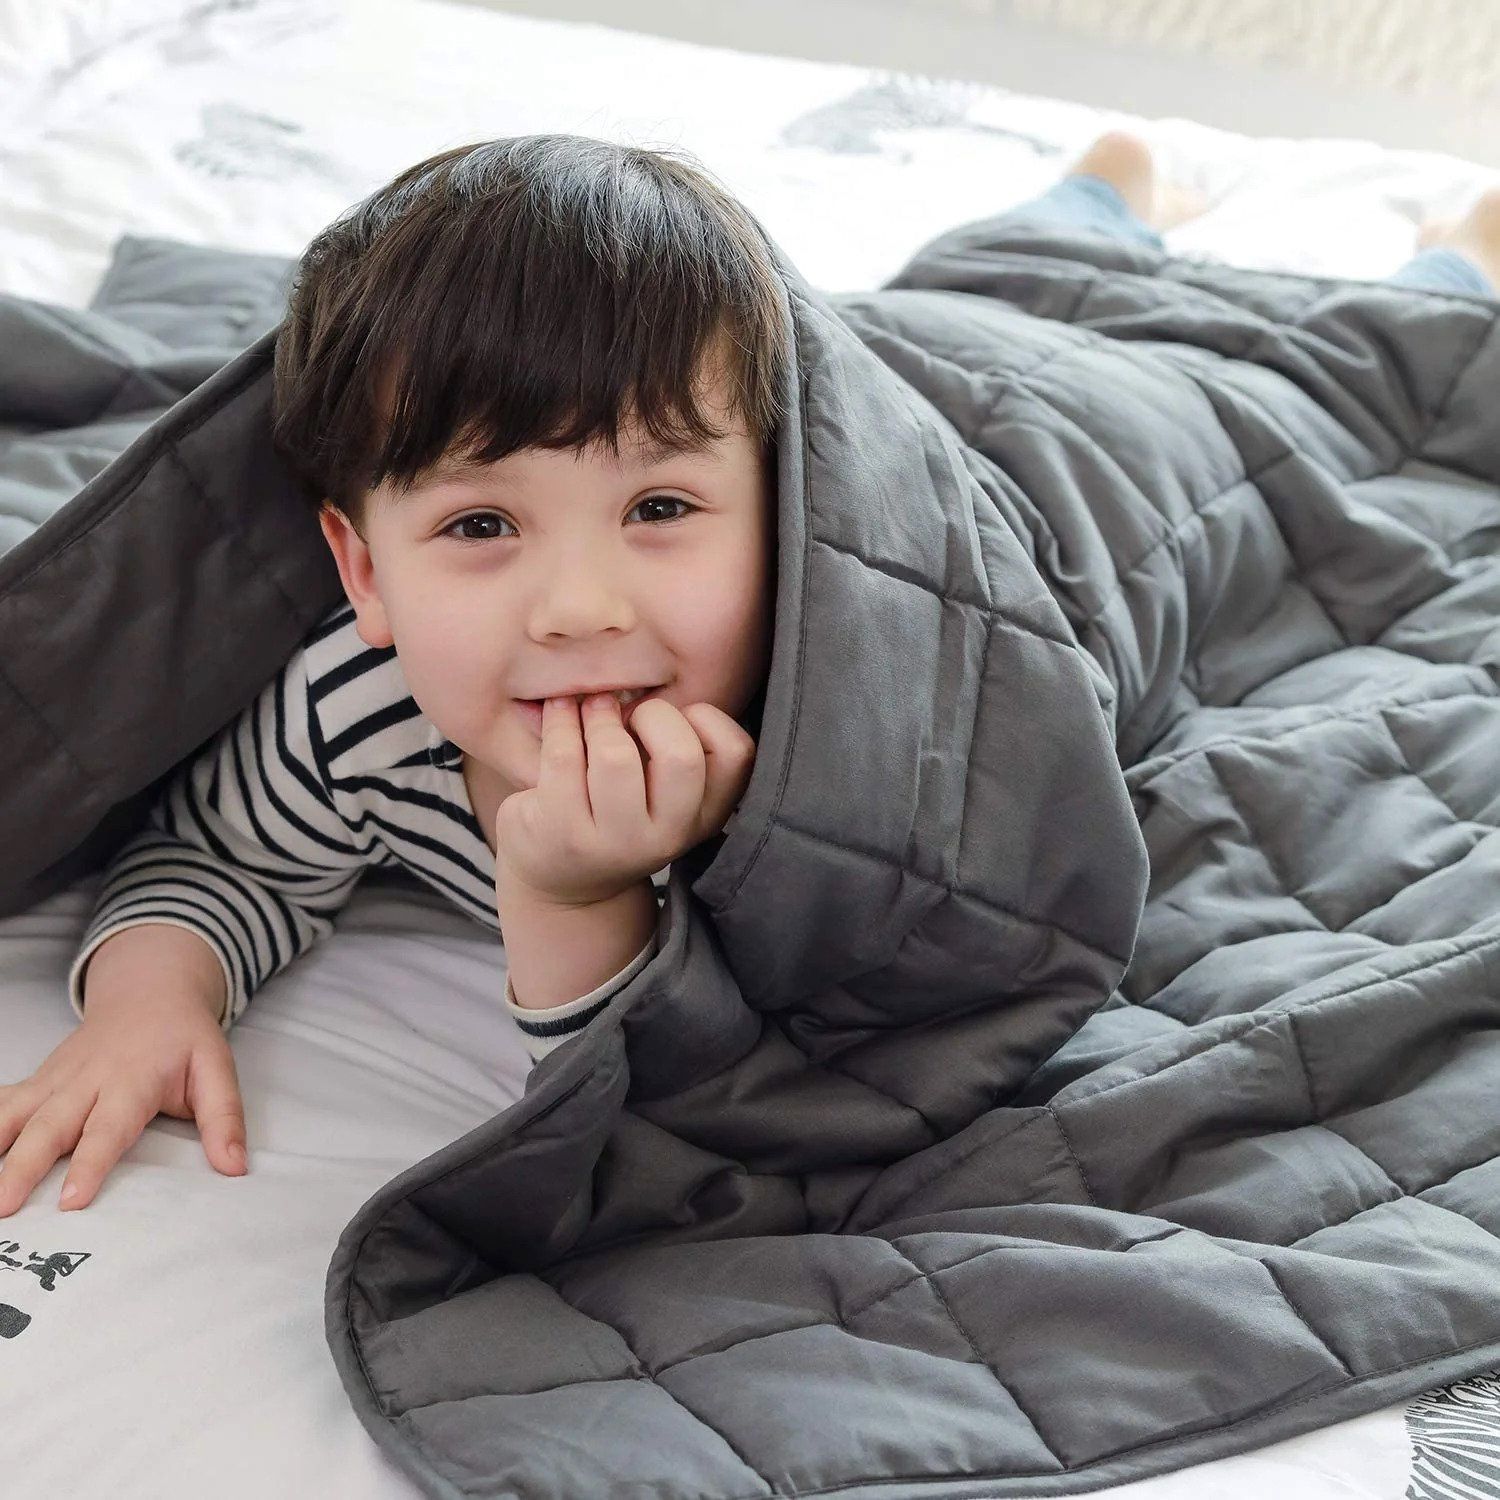 What Weighted Blanket To Get